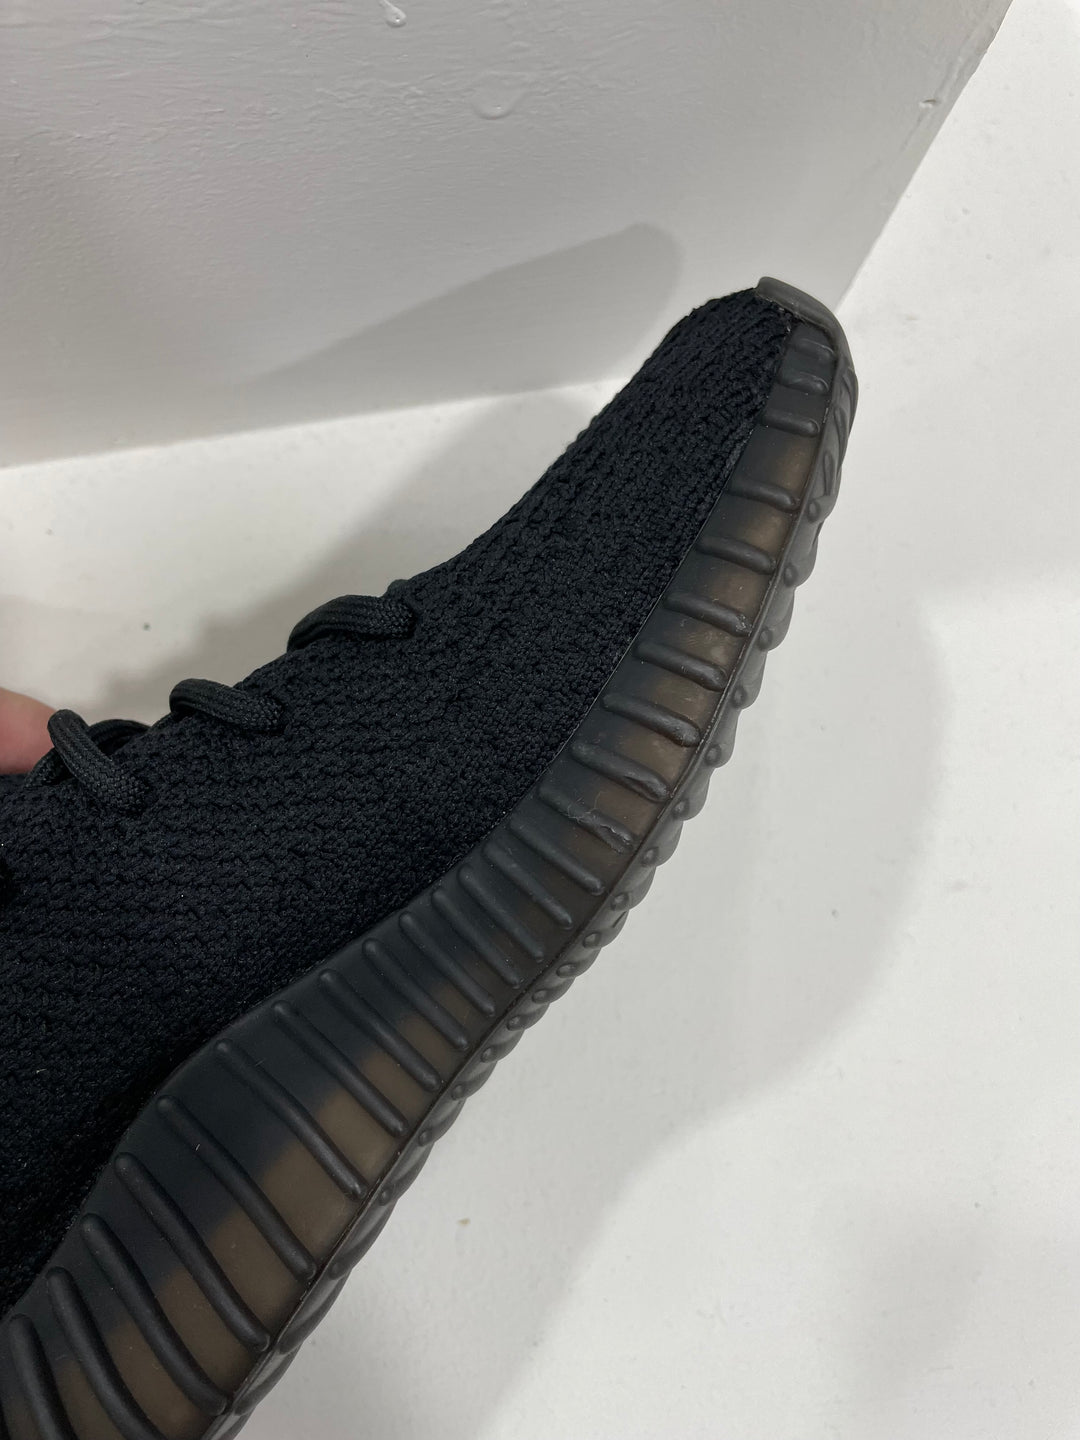 Pre-loved adidas Yeezy Boost 350 V2 'Bred' UK5/US5.5 (Condition: 9.5/10)